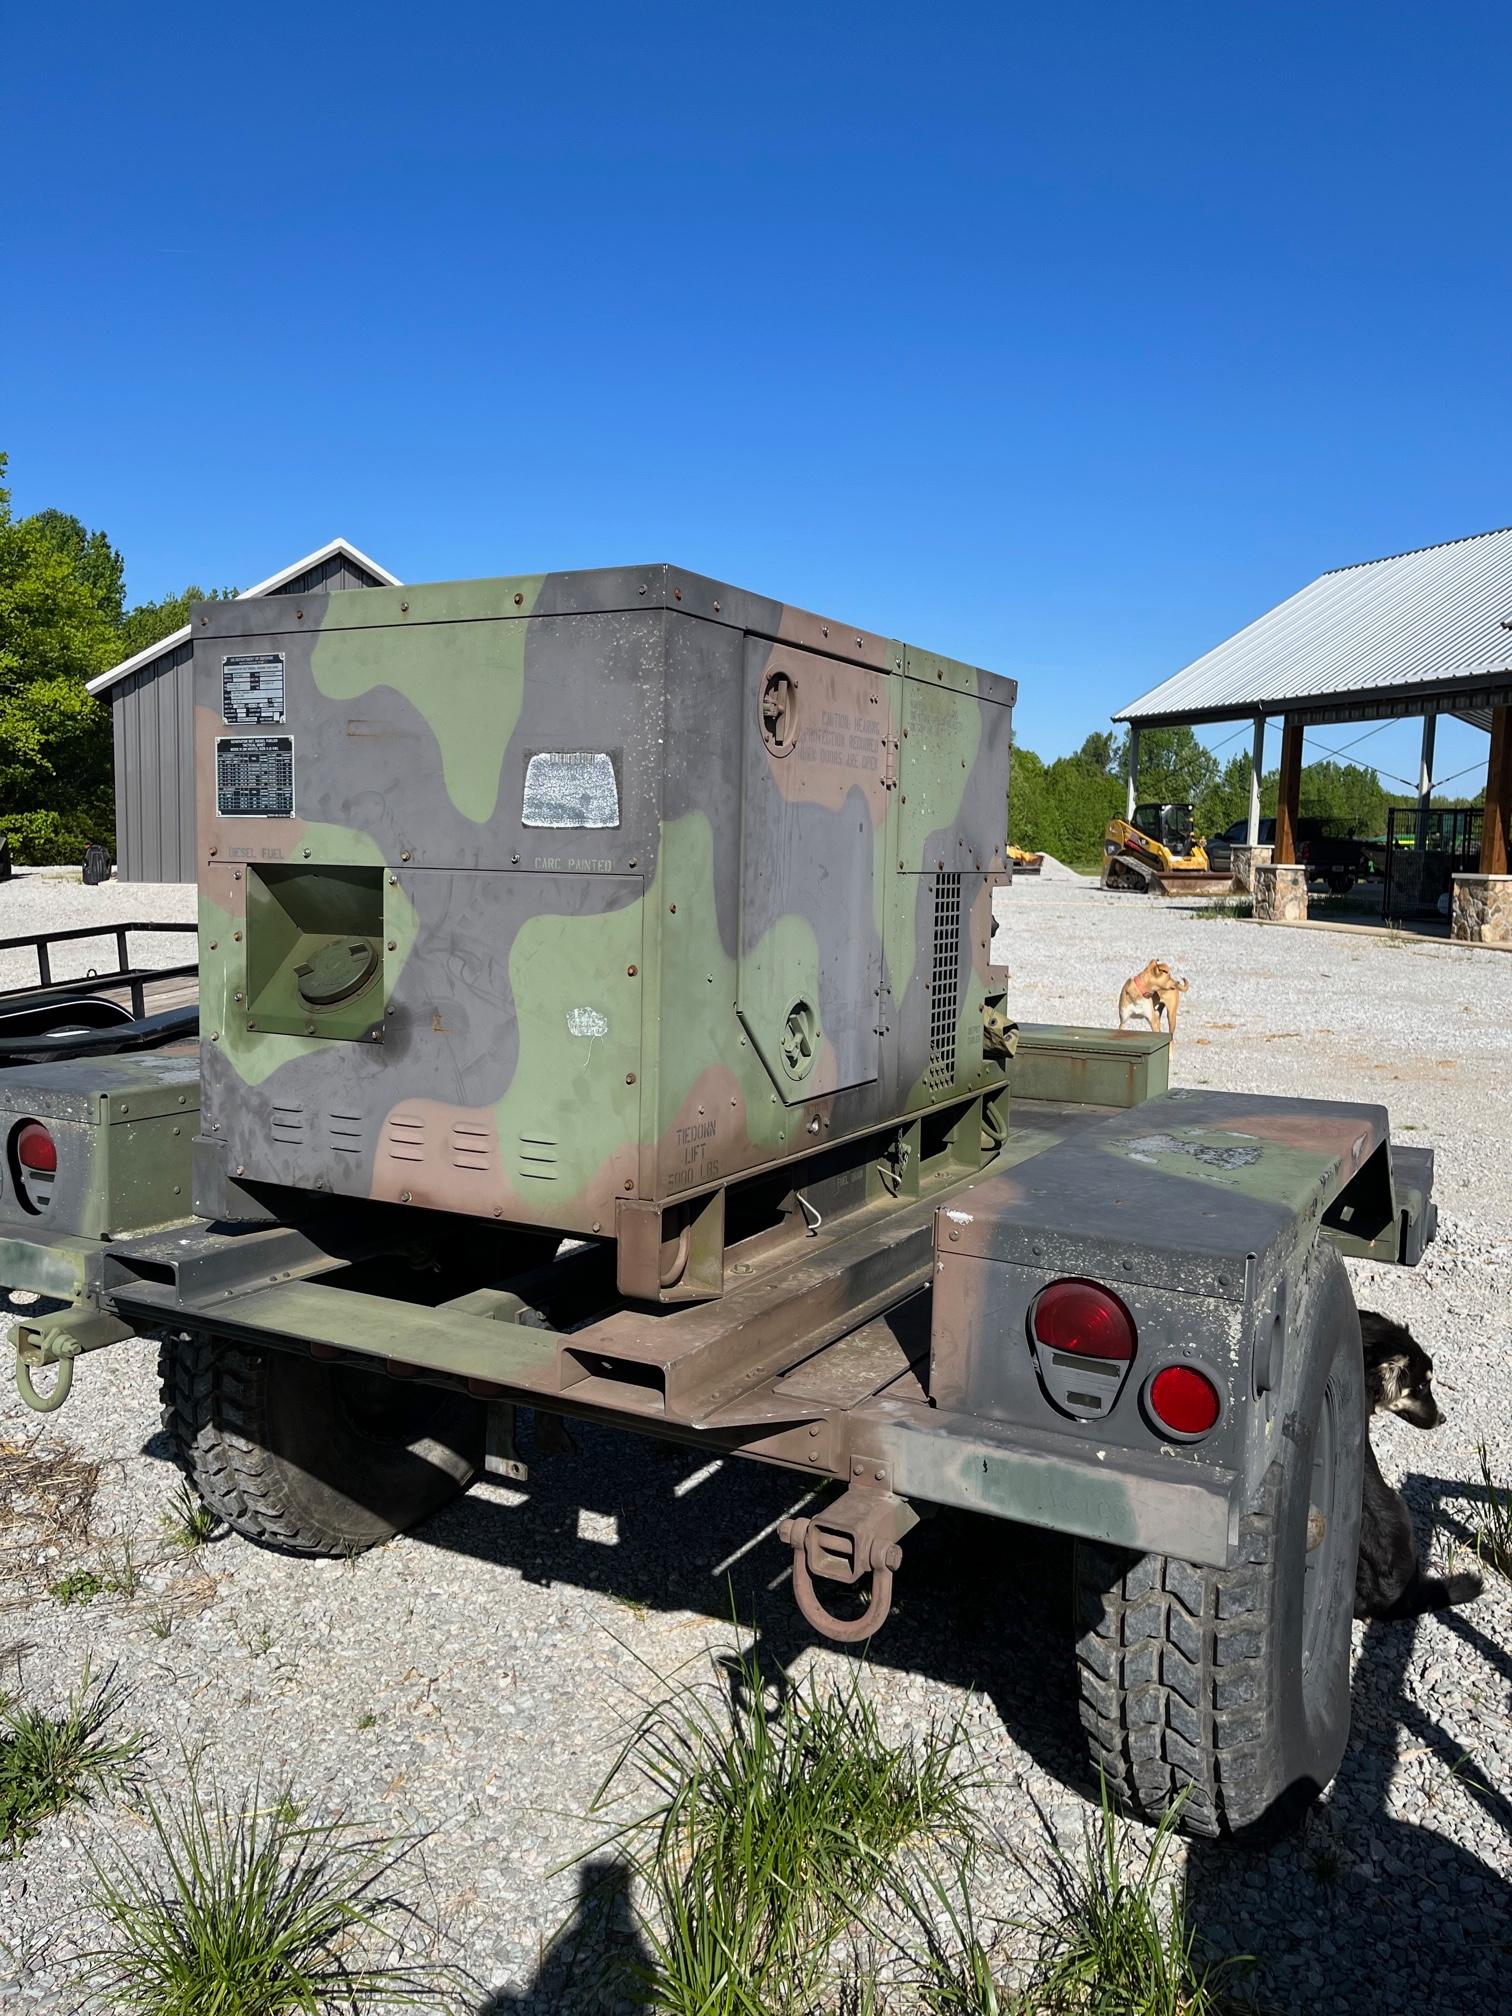 MILITARY GENERATOR AND MILITARY TRAILER